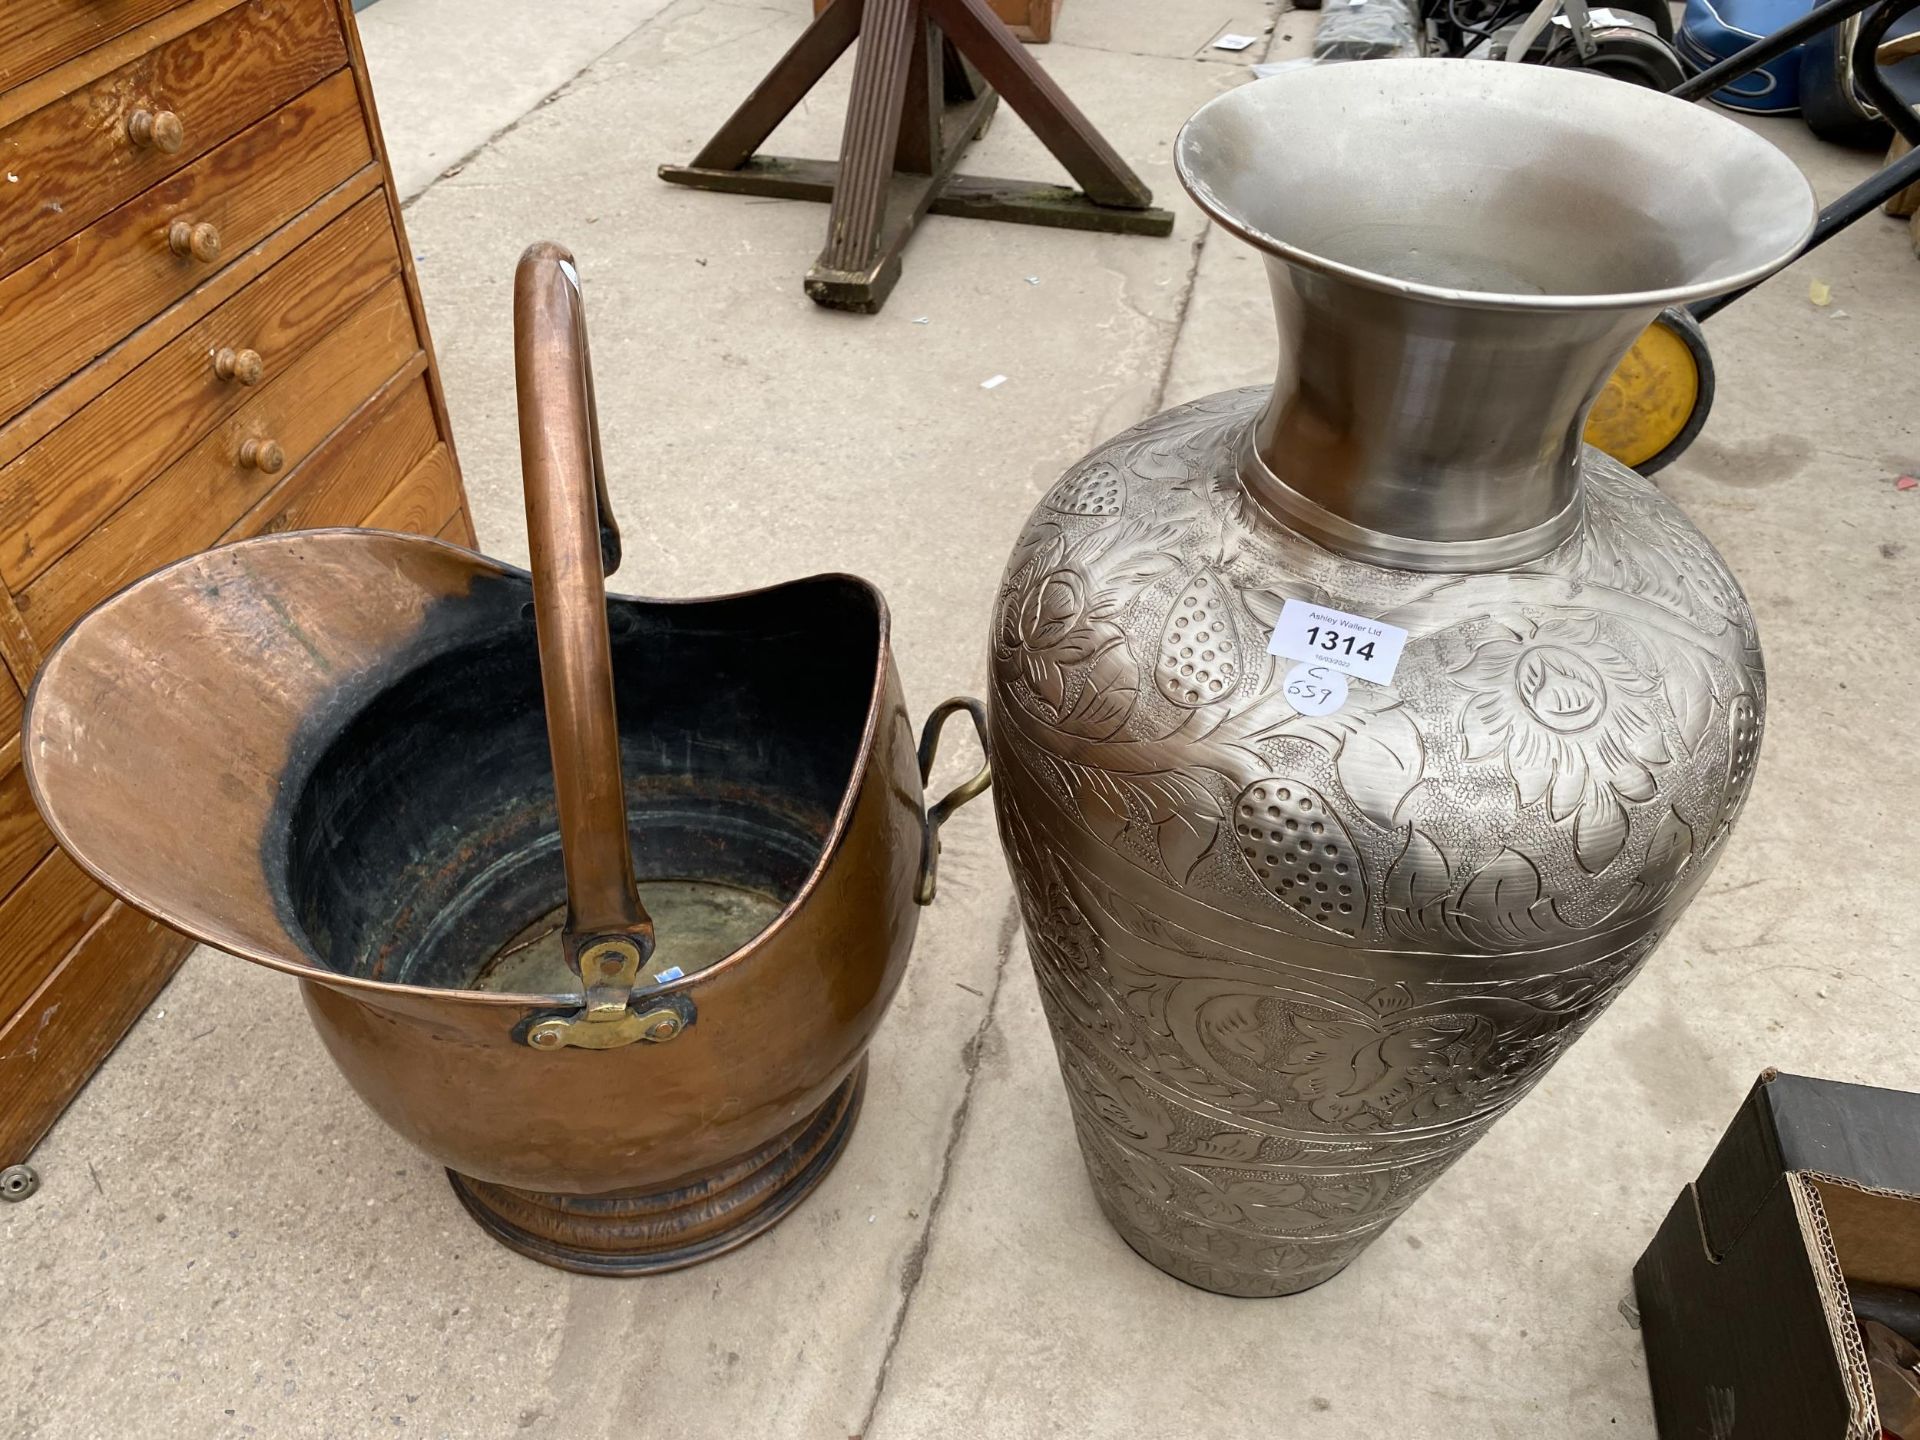 A LARGE COPPER COAL BUCKET AND A LARGE METAL VASE